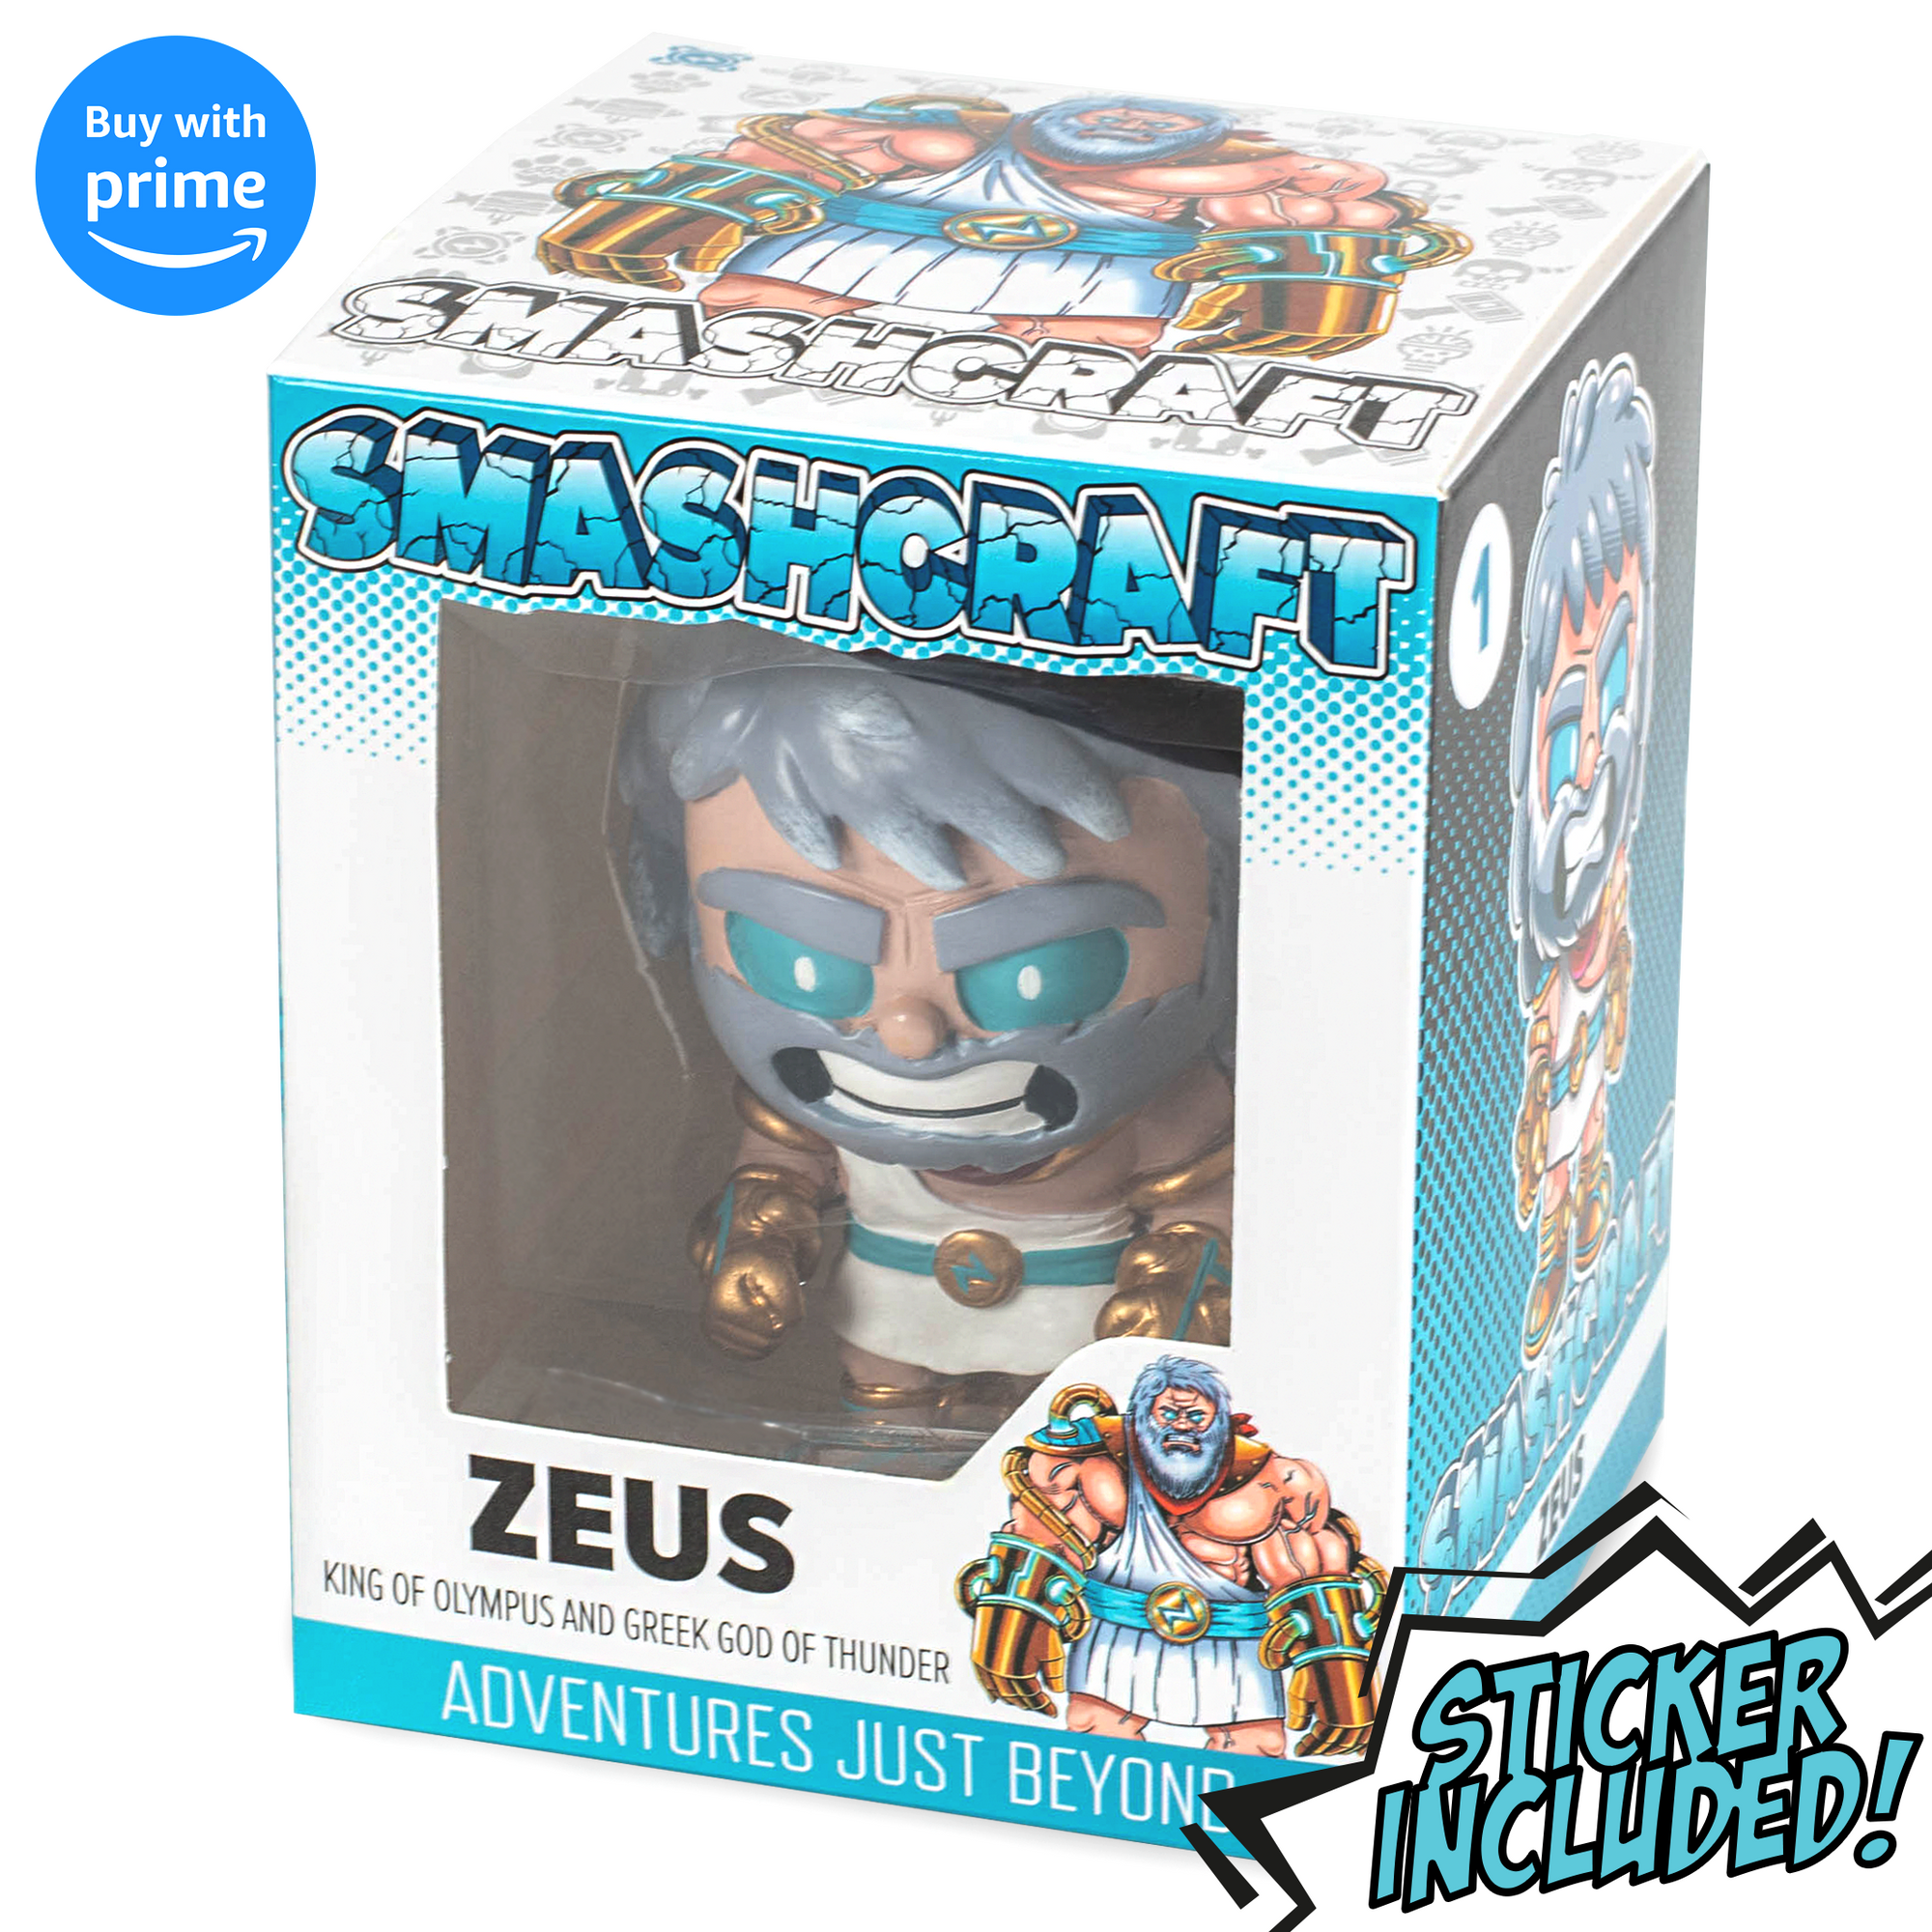 Smashcraft Zeus collectors box, with back story and memorabilia Greek character sticker